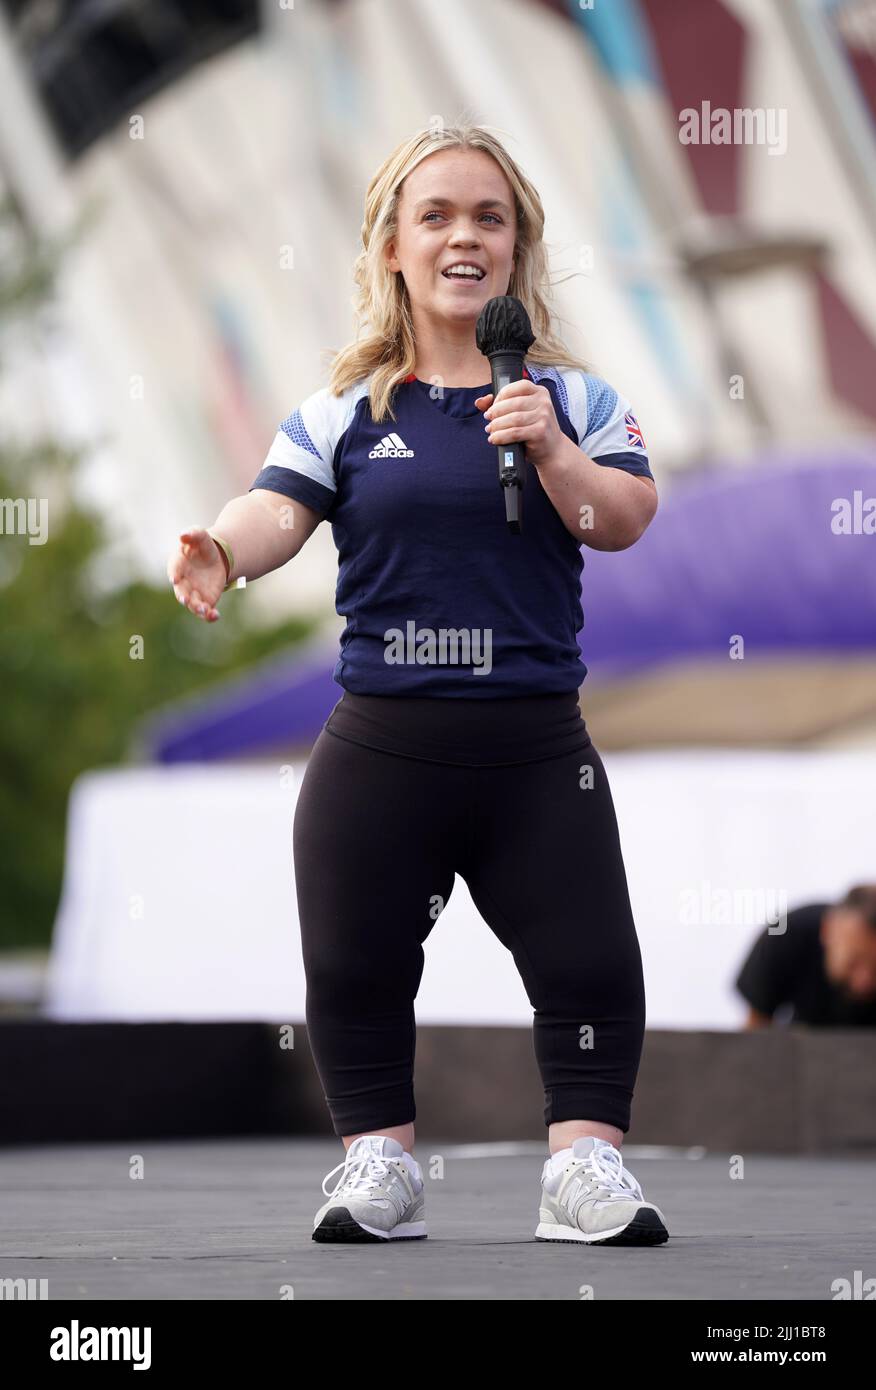 Olympic gold medallist Ellie Simmonds during the London 2012 Olympics 10th Anniversary Event held at Bridge One at the Queen Elizabeth Olympic Park, London. Wednesday July 27 will mark exactly 10 years since the opening ceremony of the 2012 London Olympics Games. Picture date: Friday July 22, 2022. Stock Photo